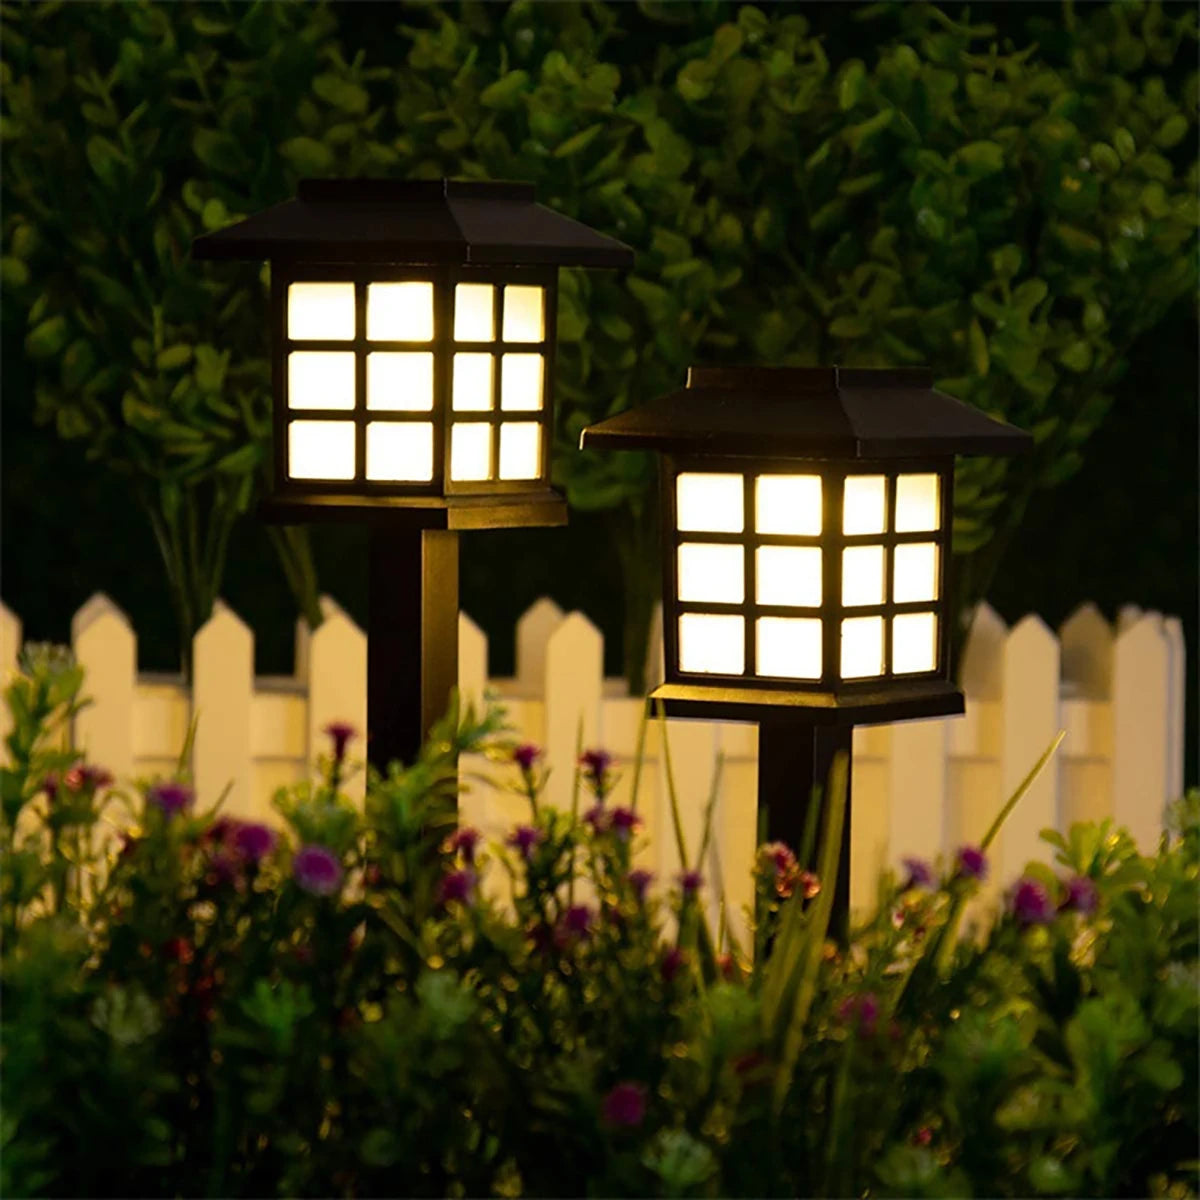 Outdoor Solar LED Lawn Light Pathway lamp Waterproof LED Night Lights